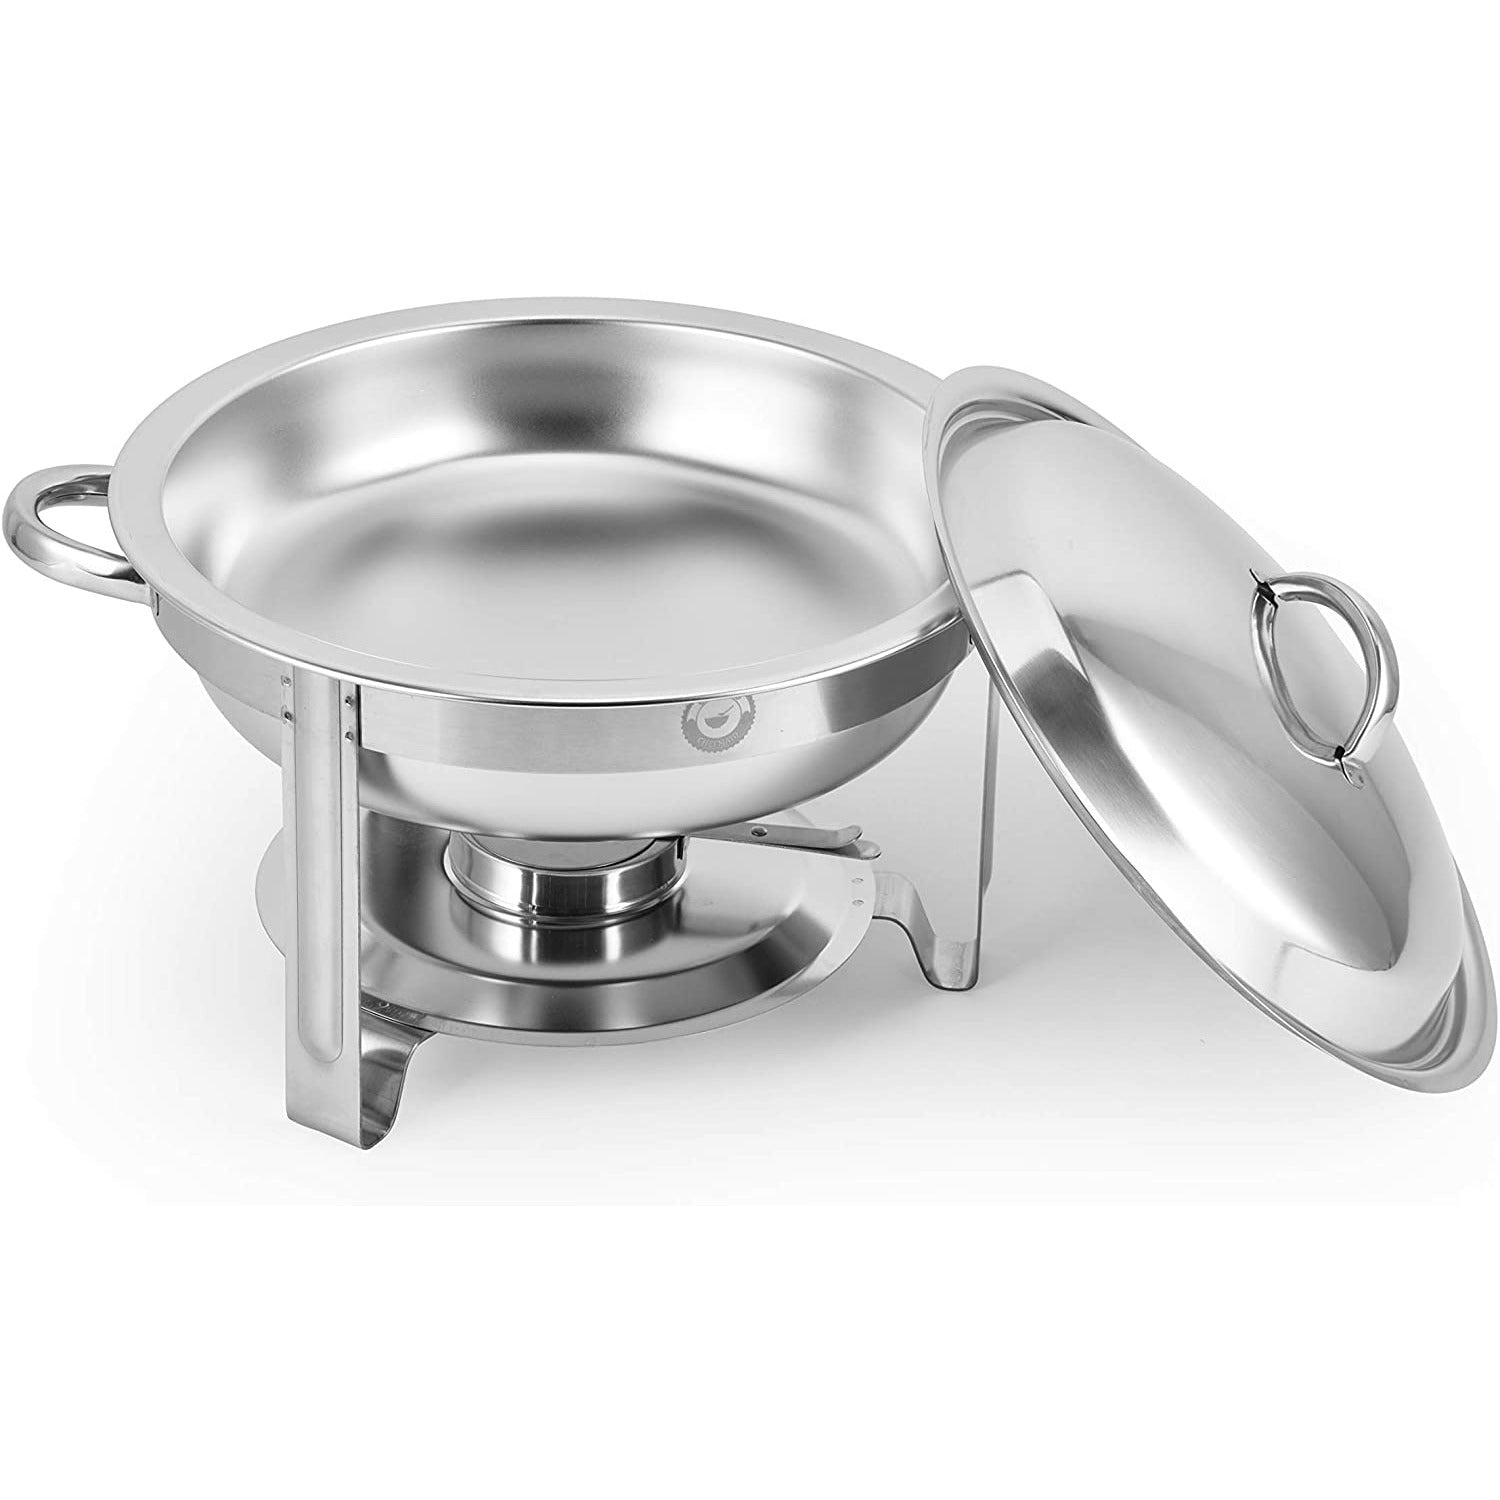 Round Chafing dish buffet set Stainless Steel 4 Quart Capacity [Set Of 2]